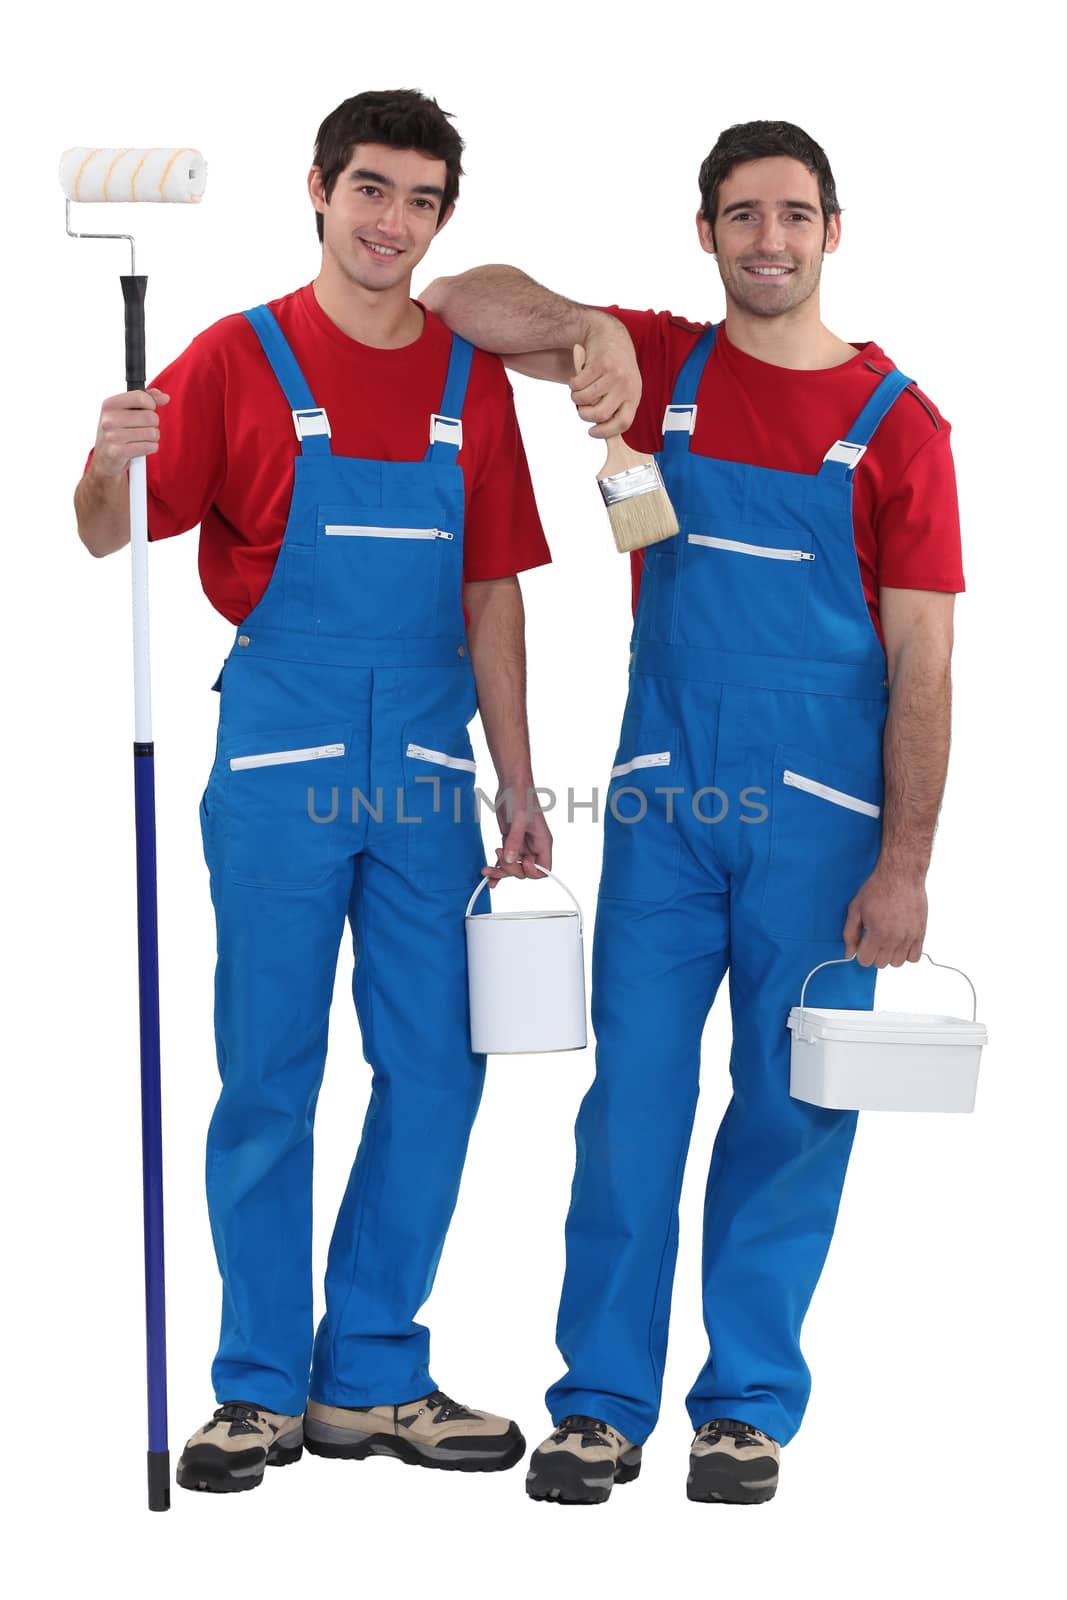 Two decorators dressed in the exact same outfit by phovoir